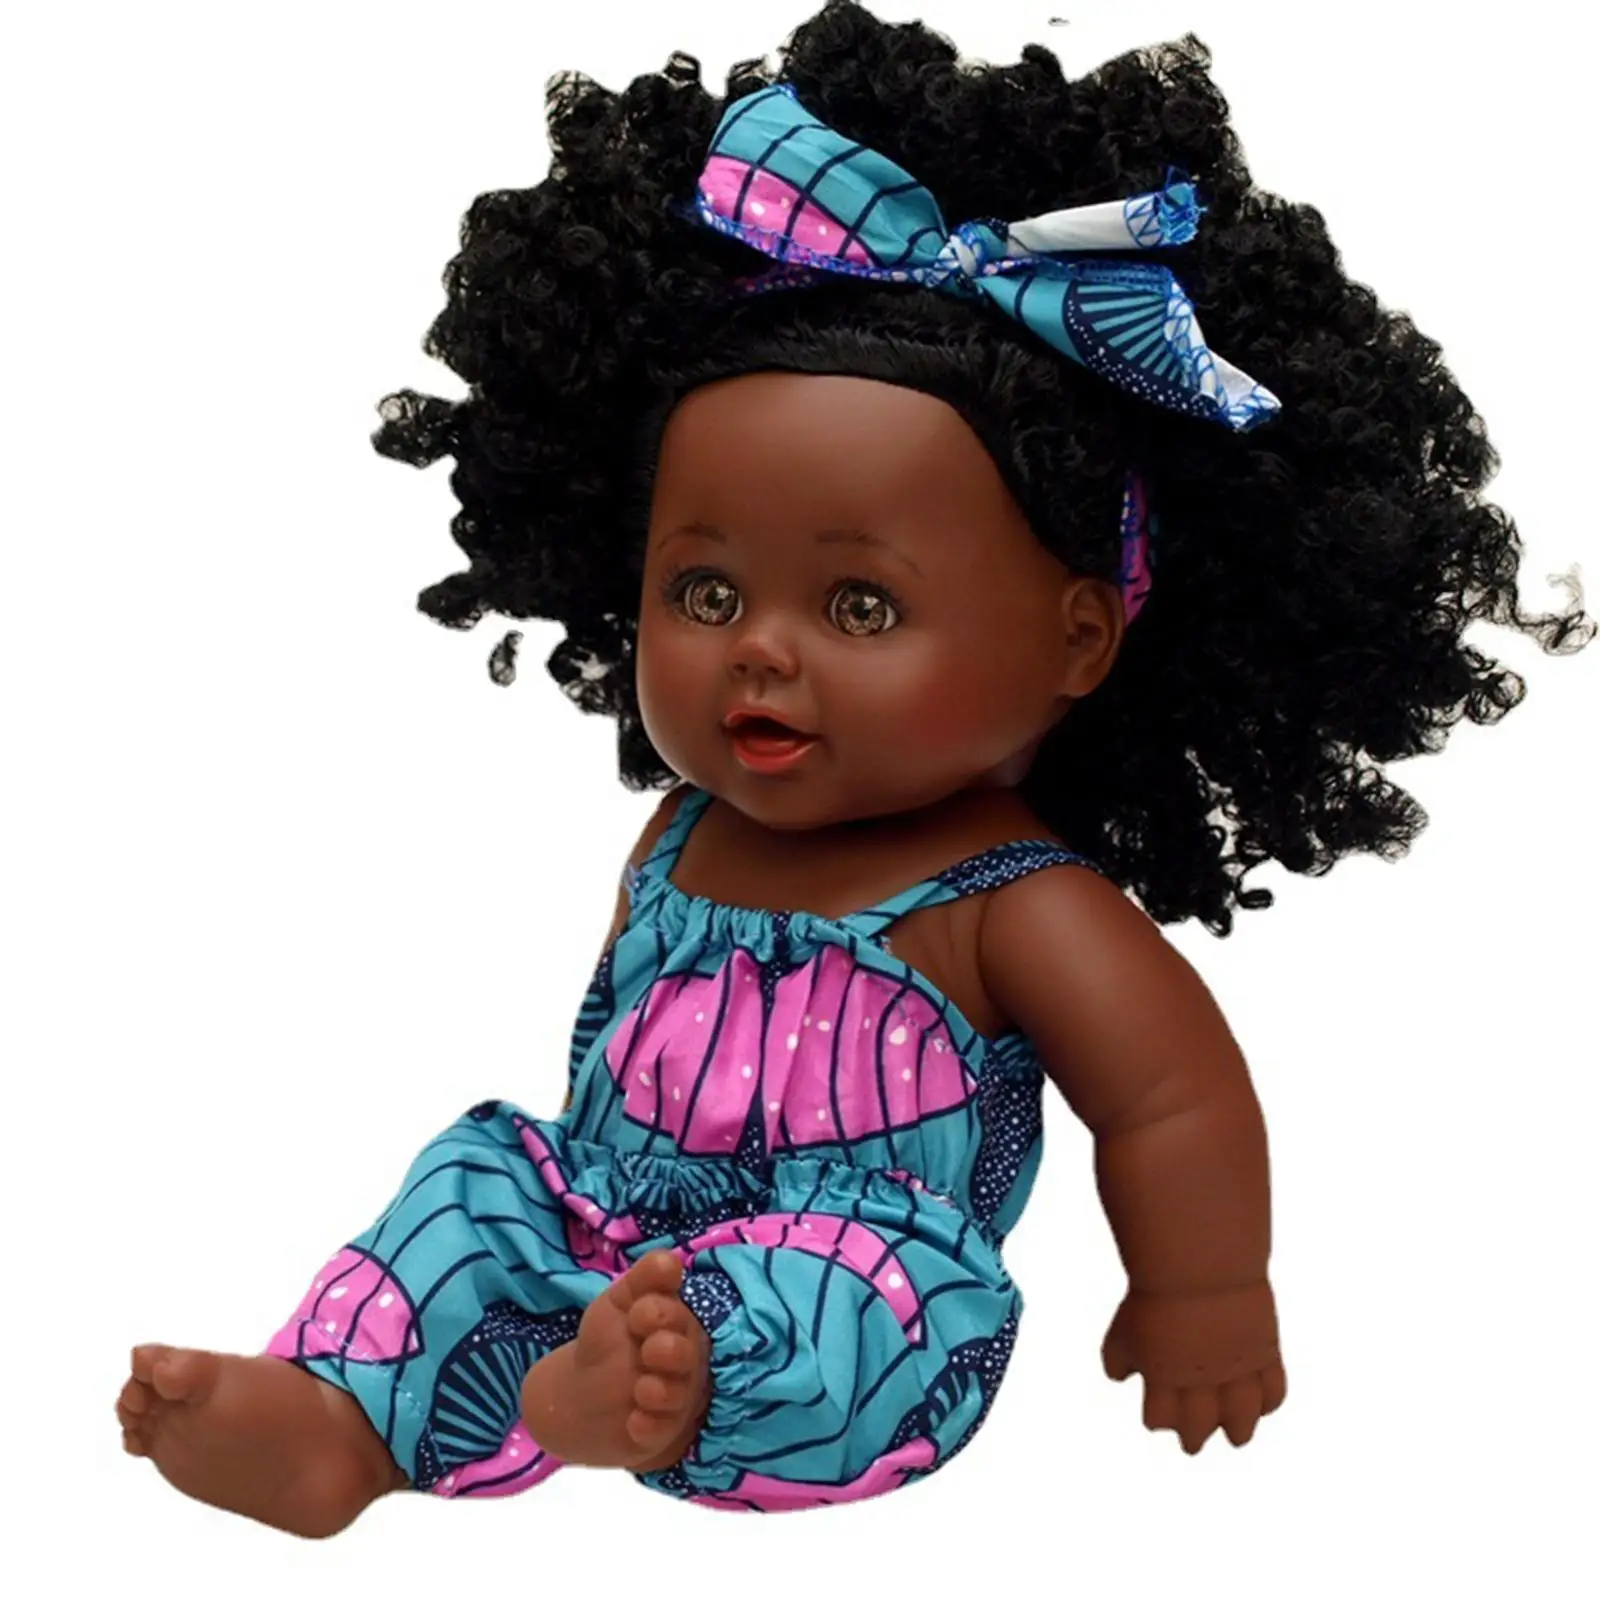 Cute Baby Doll 30cm Black Skin DIY with Clothes Curly Hair Realistic African Baby Doll Black Girl Doll for Toddler Infants Kids